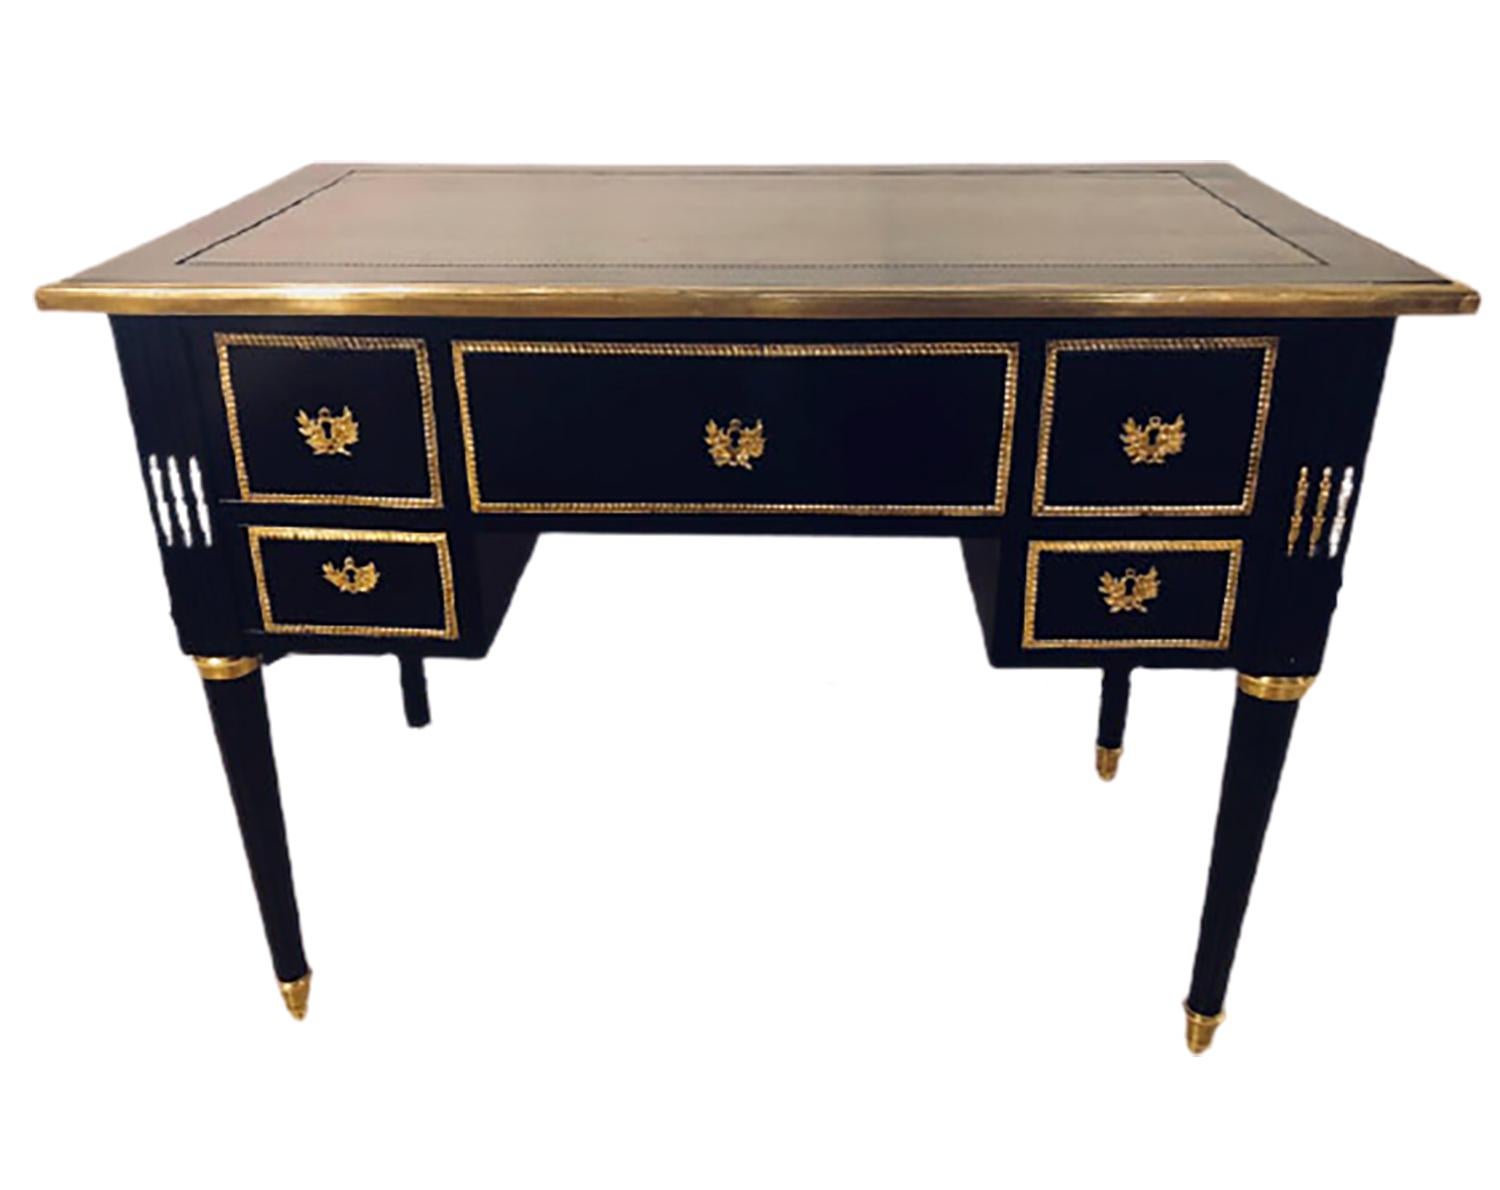 Hollywood Regency shines with this fine Jansen styled ebonized bronze mounted writing office desk or vanity having been fashioned in the Louis XVI style. This fine knee hole desk has a wonderful ebony finish that has been hand rubbed French